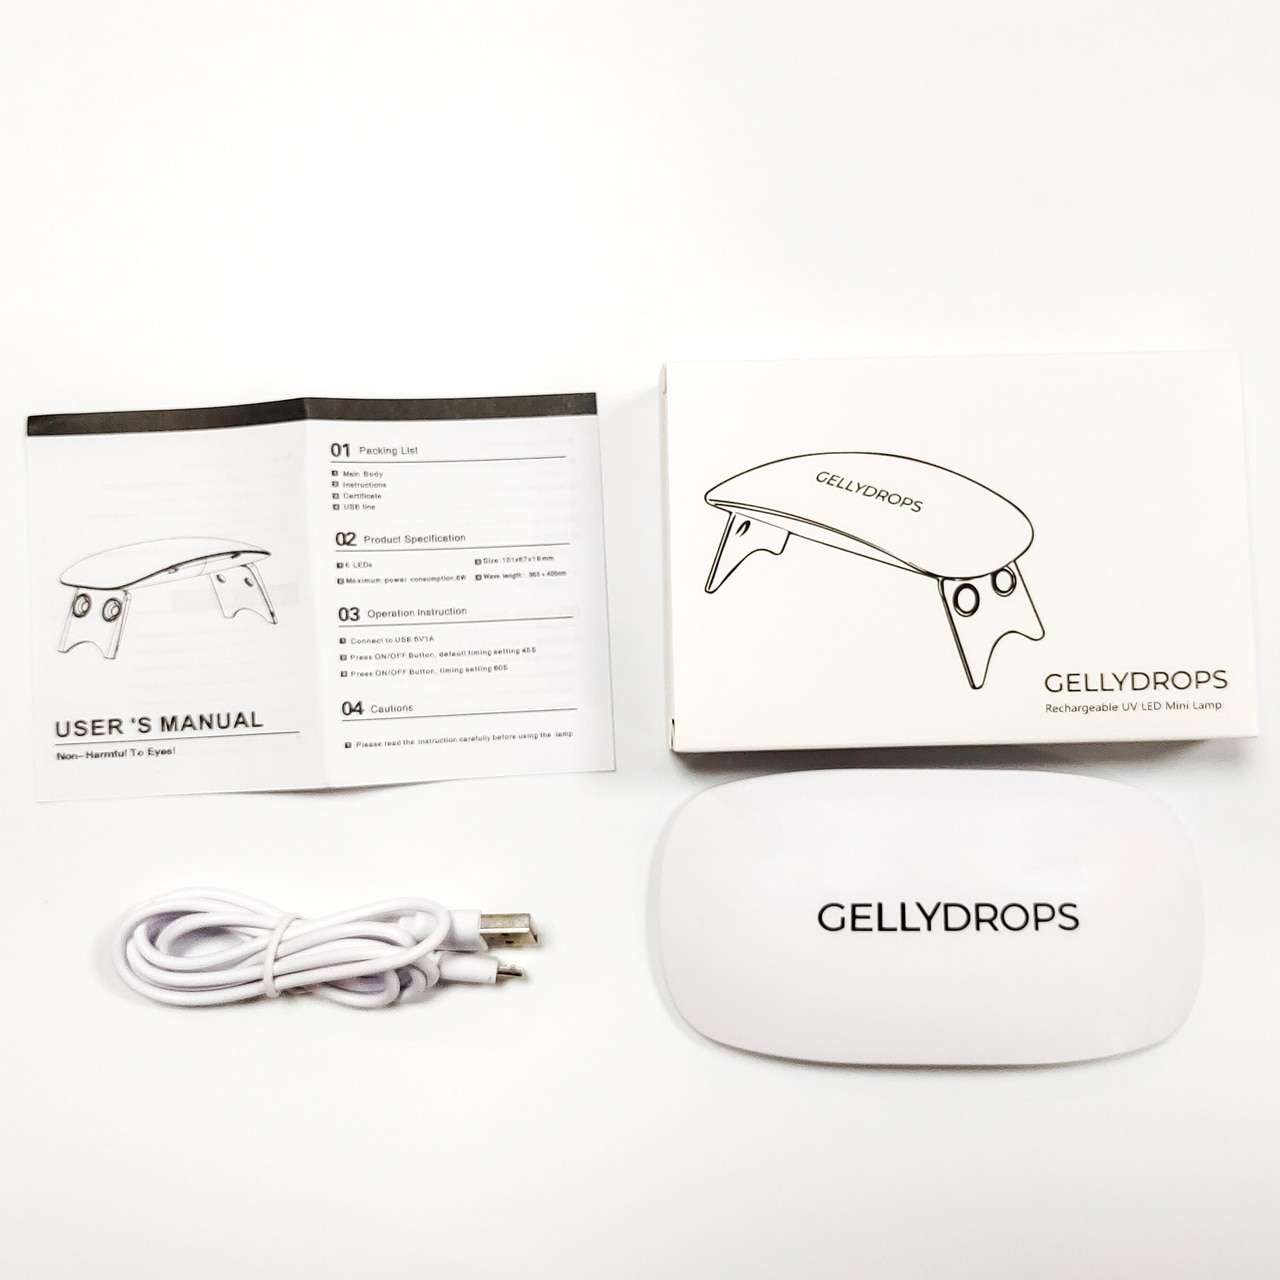 Gellydrop rechargeable UV lamp is the size of a mouse.